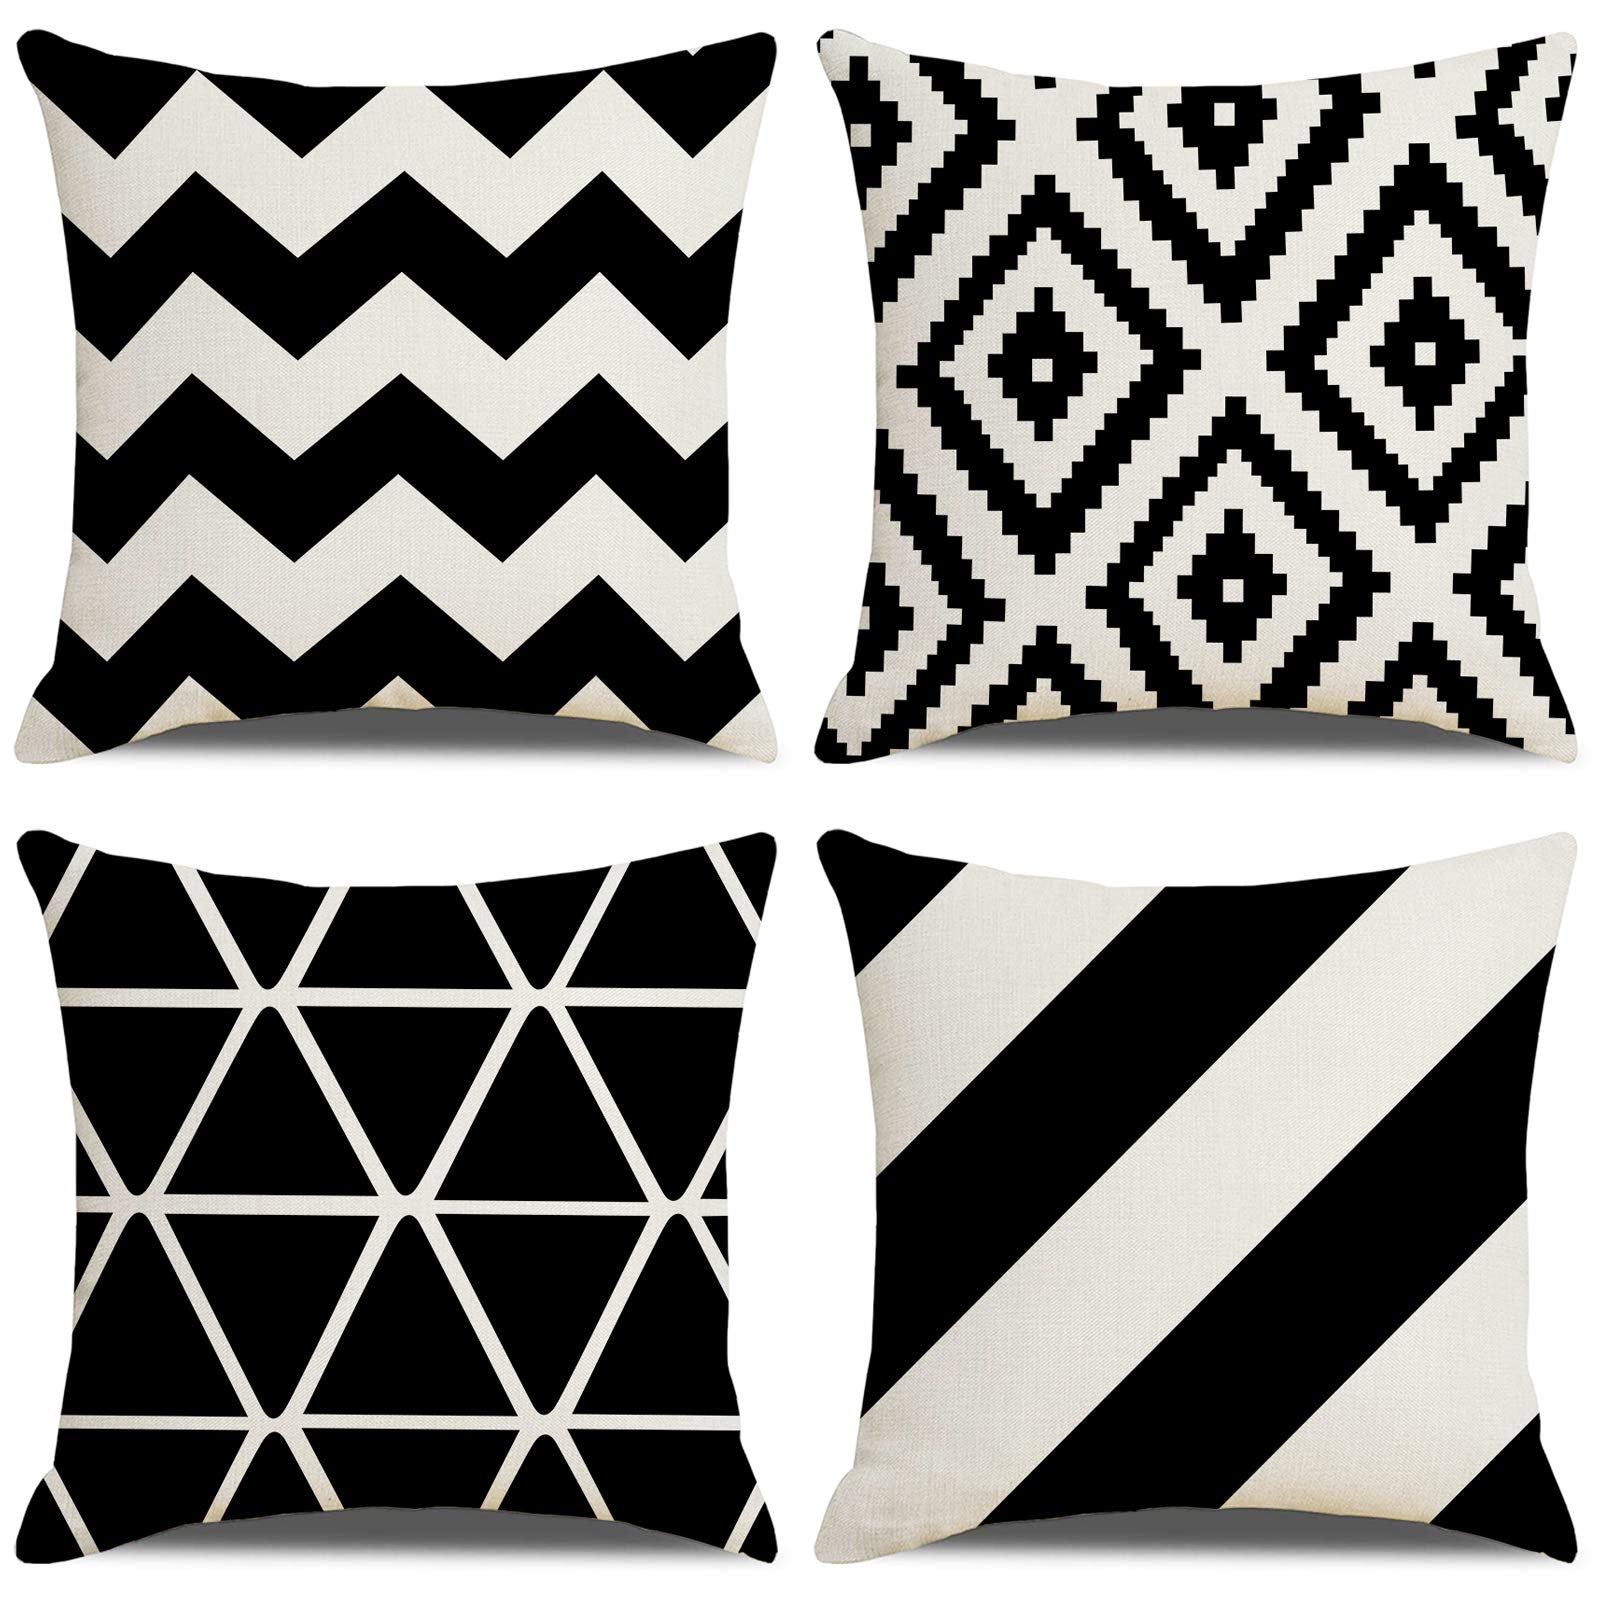 Cushion Covers Pack of 4 ,LAXEUYO Outdoor Cushions Geometric Figures Throw Pillow Case Decorative for Living Room Sofa Bed with Invisible Zipper,45cm x 45cm/18x18 inch Black and White